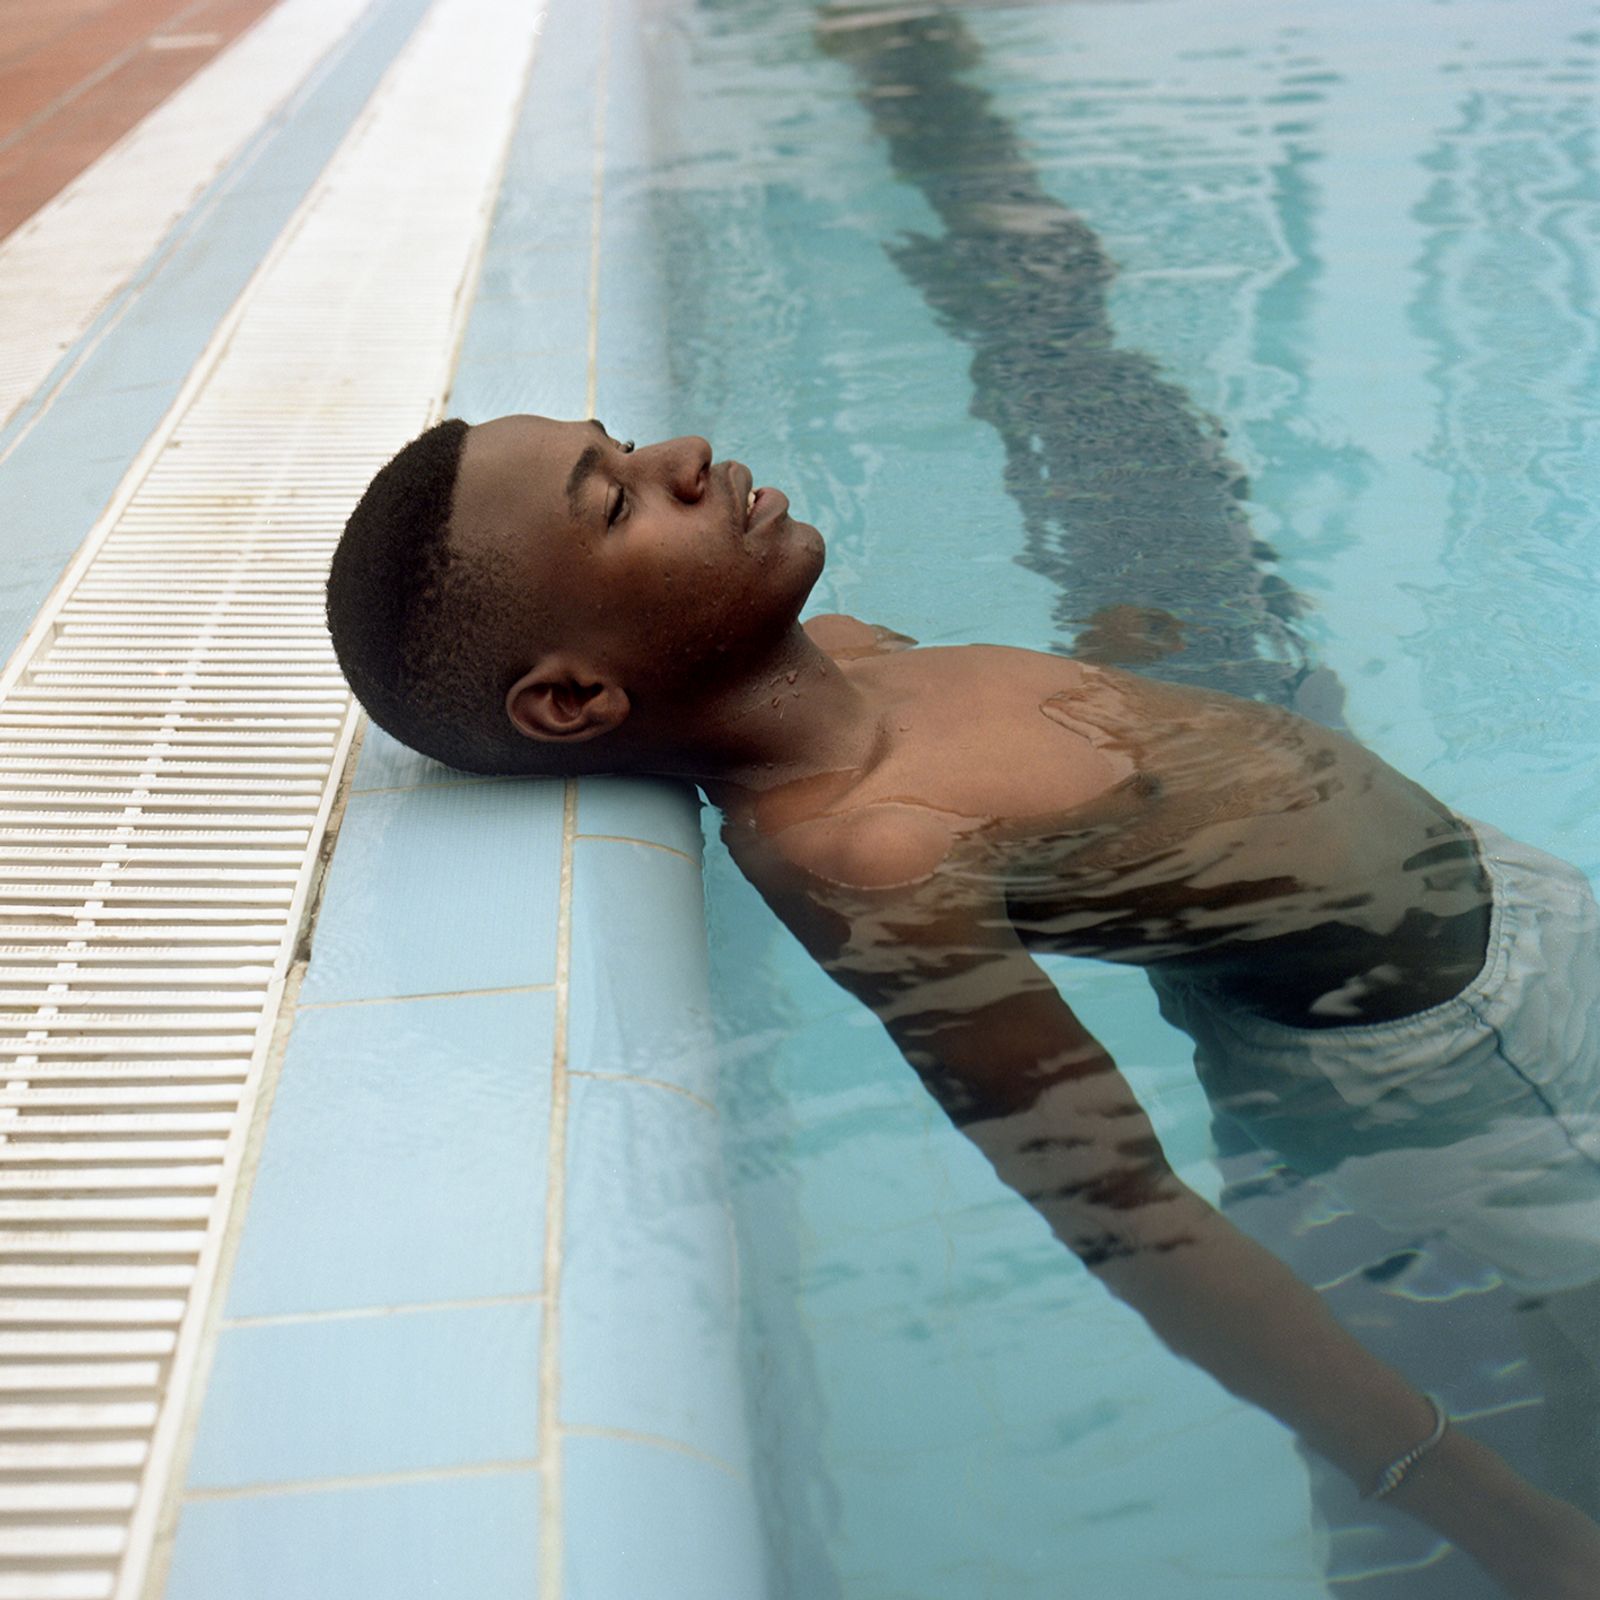 © Linda Bournane Engelberth - Image from the Outside the Binary Africa photography project